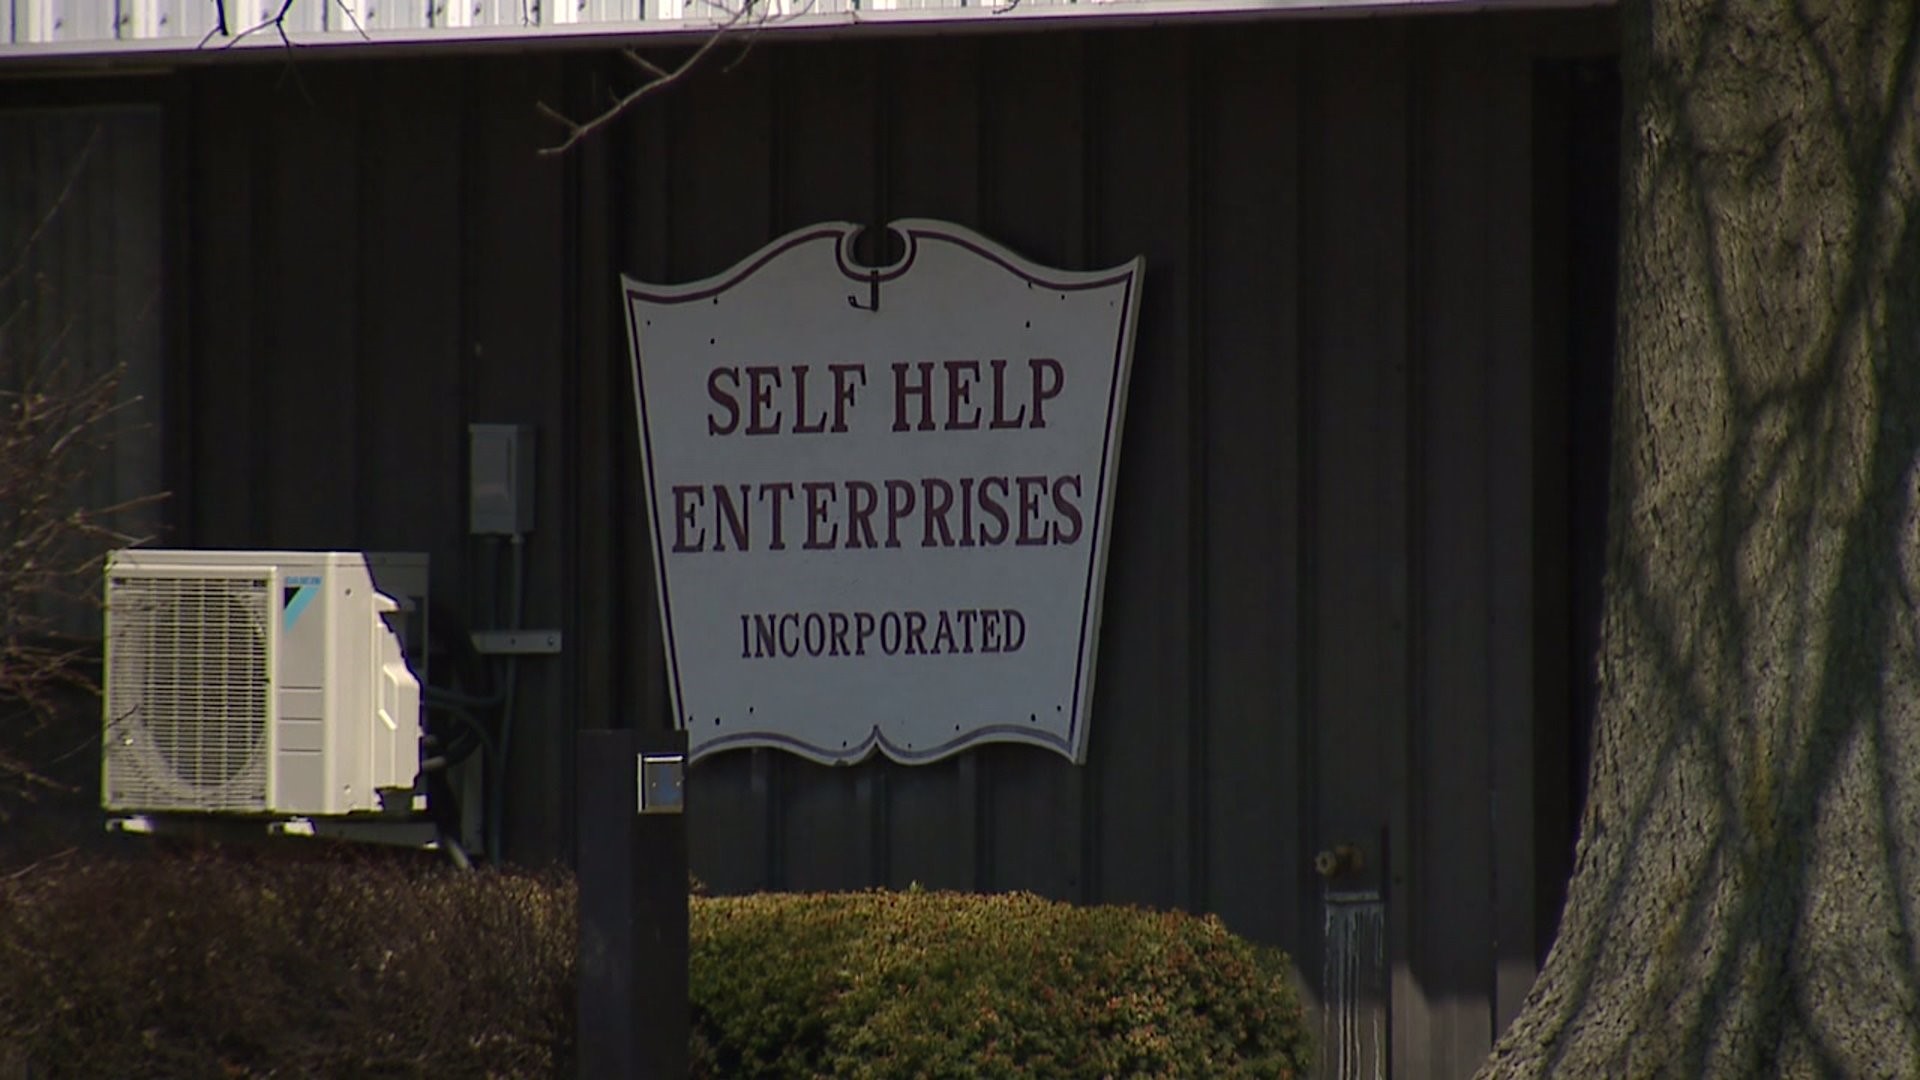 Self Help enterprises knocked for improperly paying workers